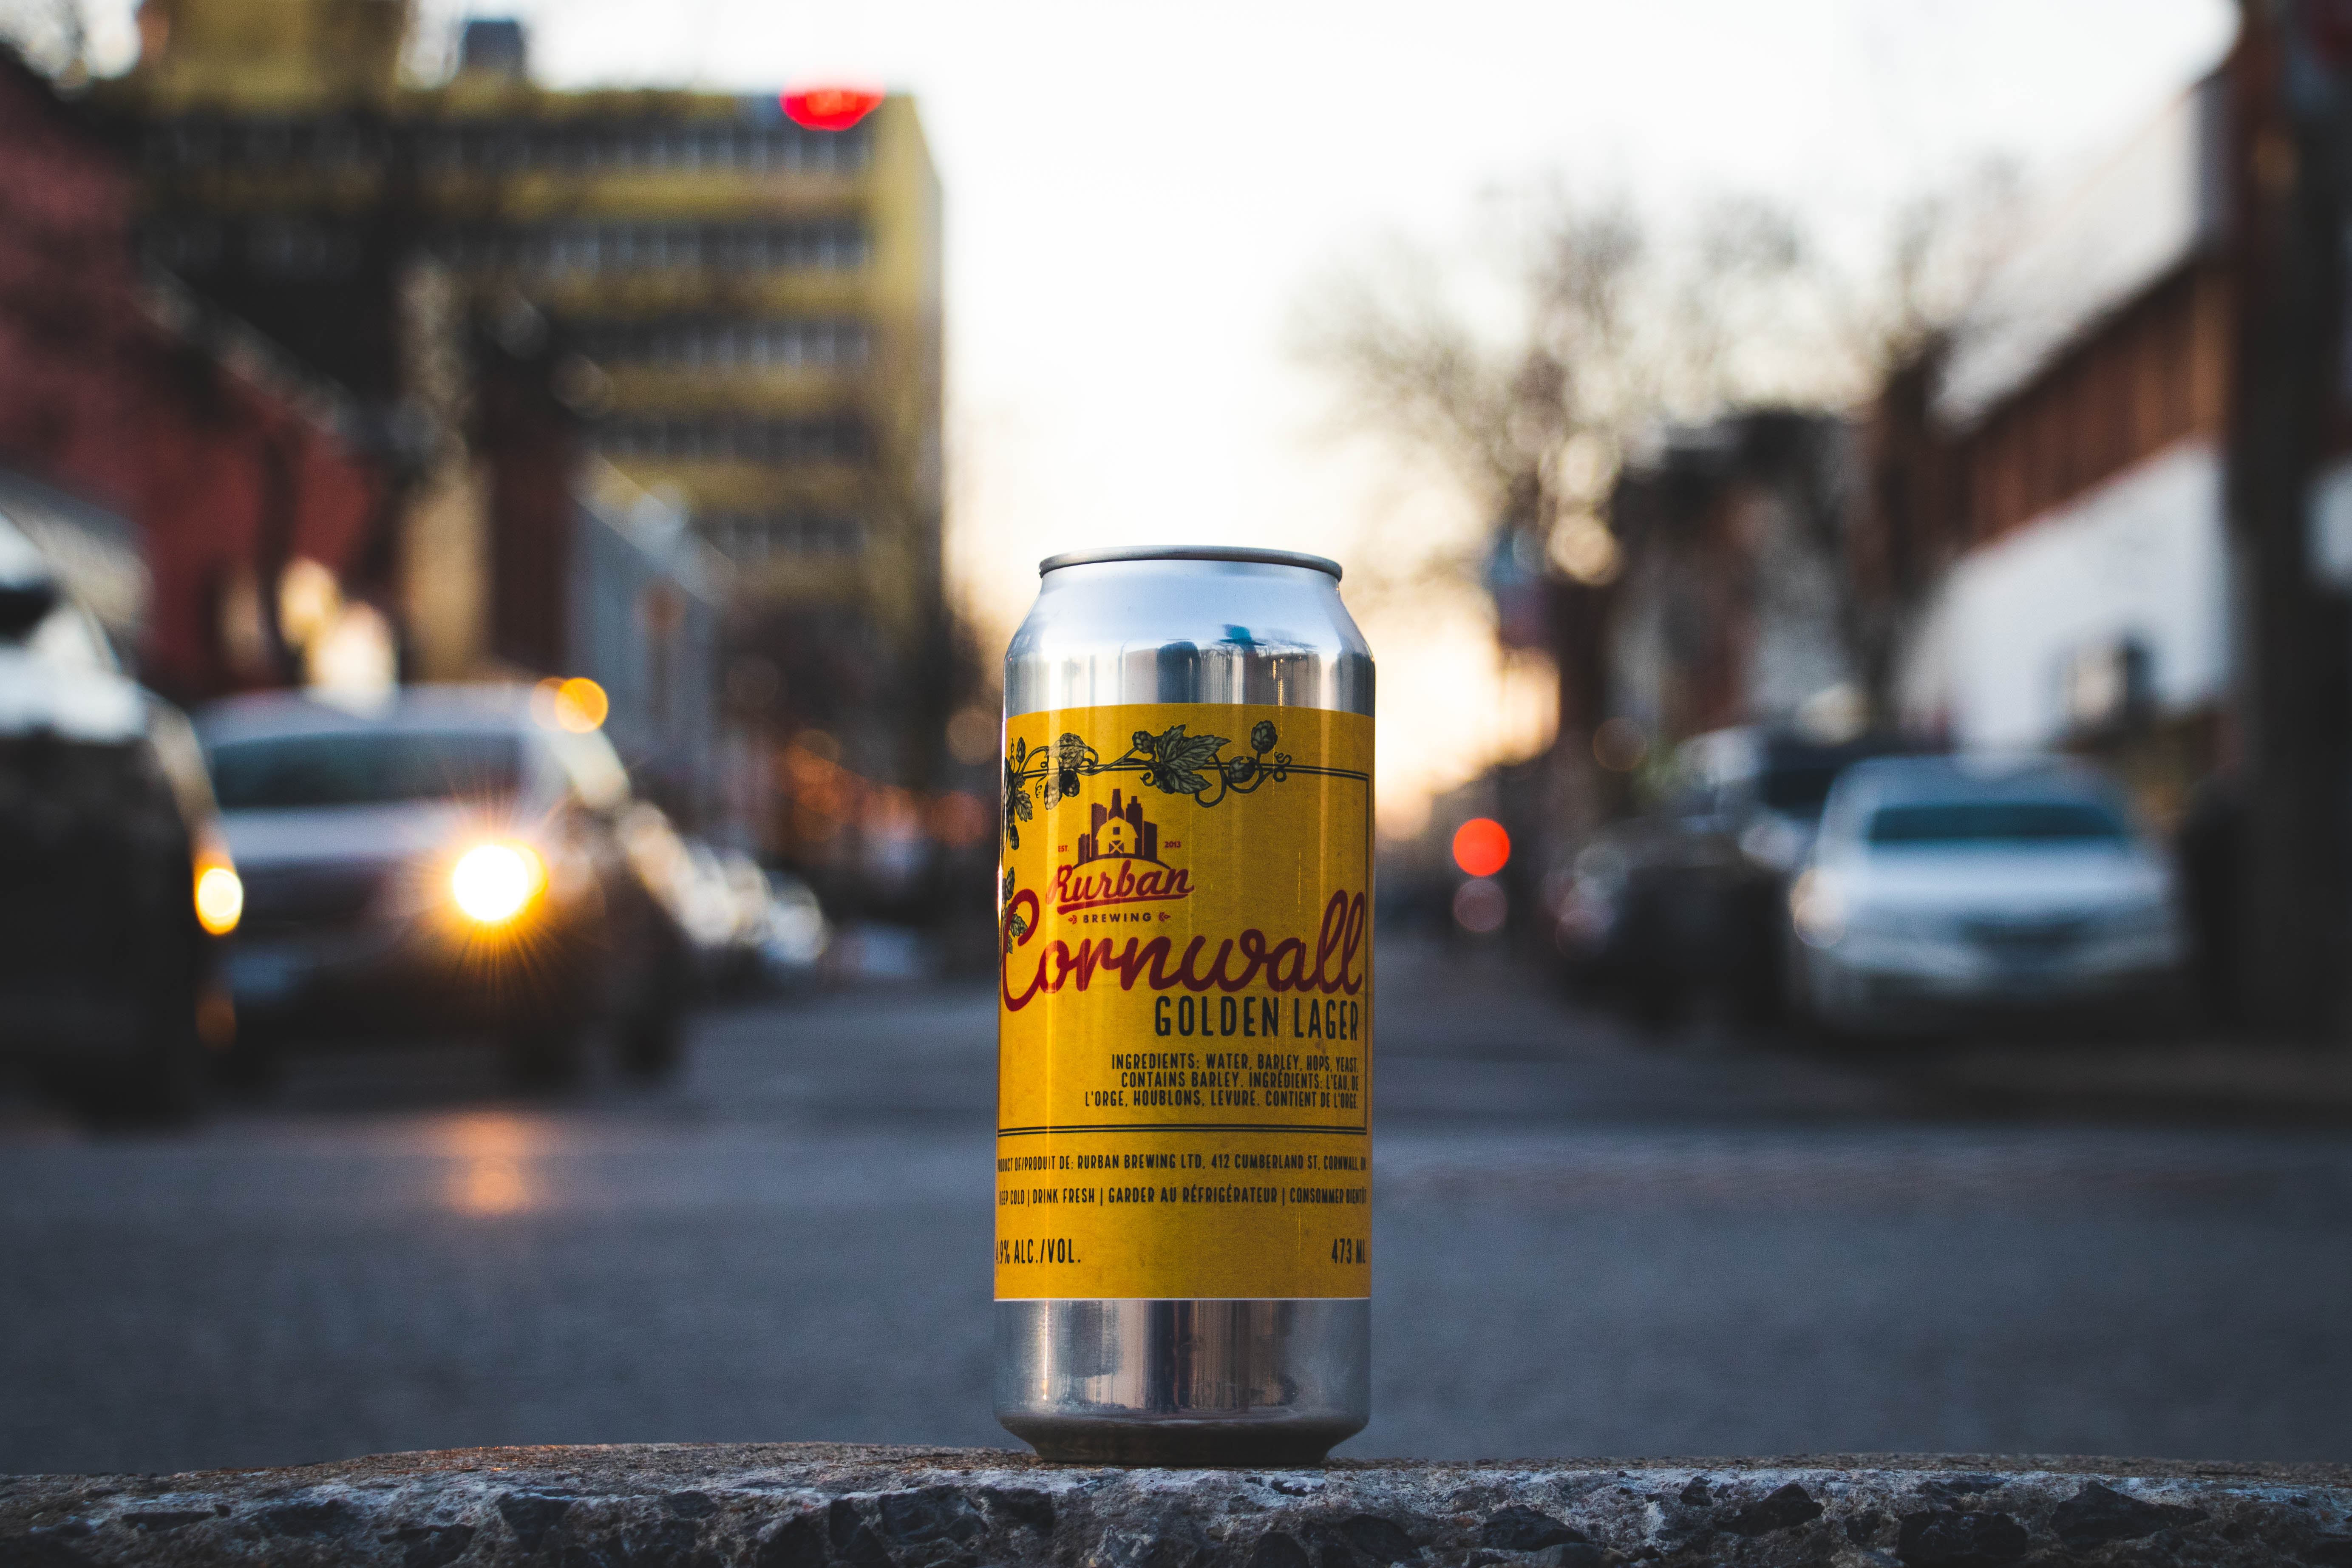 Cornwall Lager, in downtown Cornwall